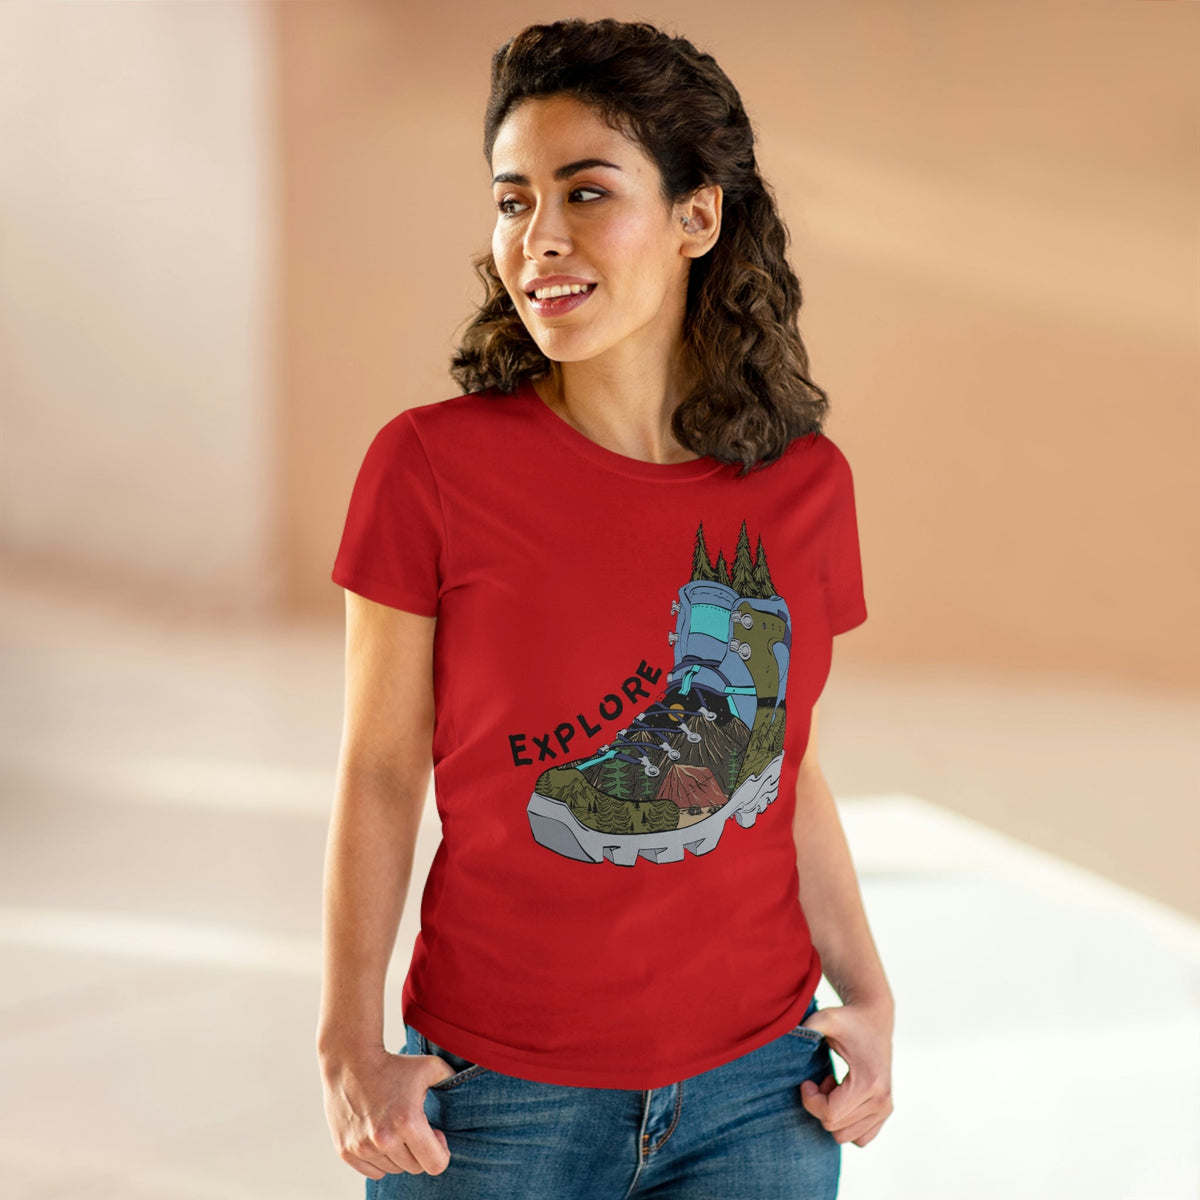 Explore Women's Midweight Cotton Tee - Salty Medic Clothing Co.